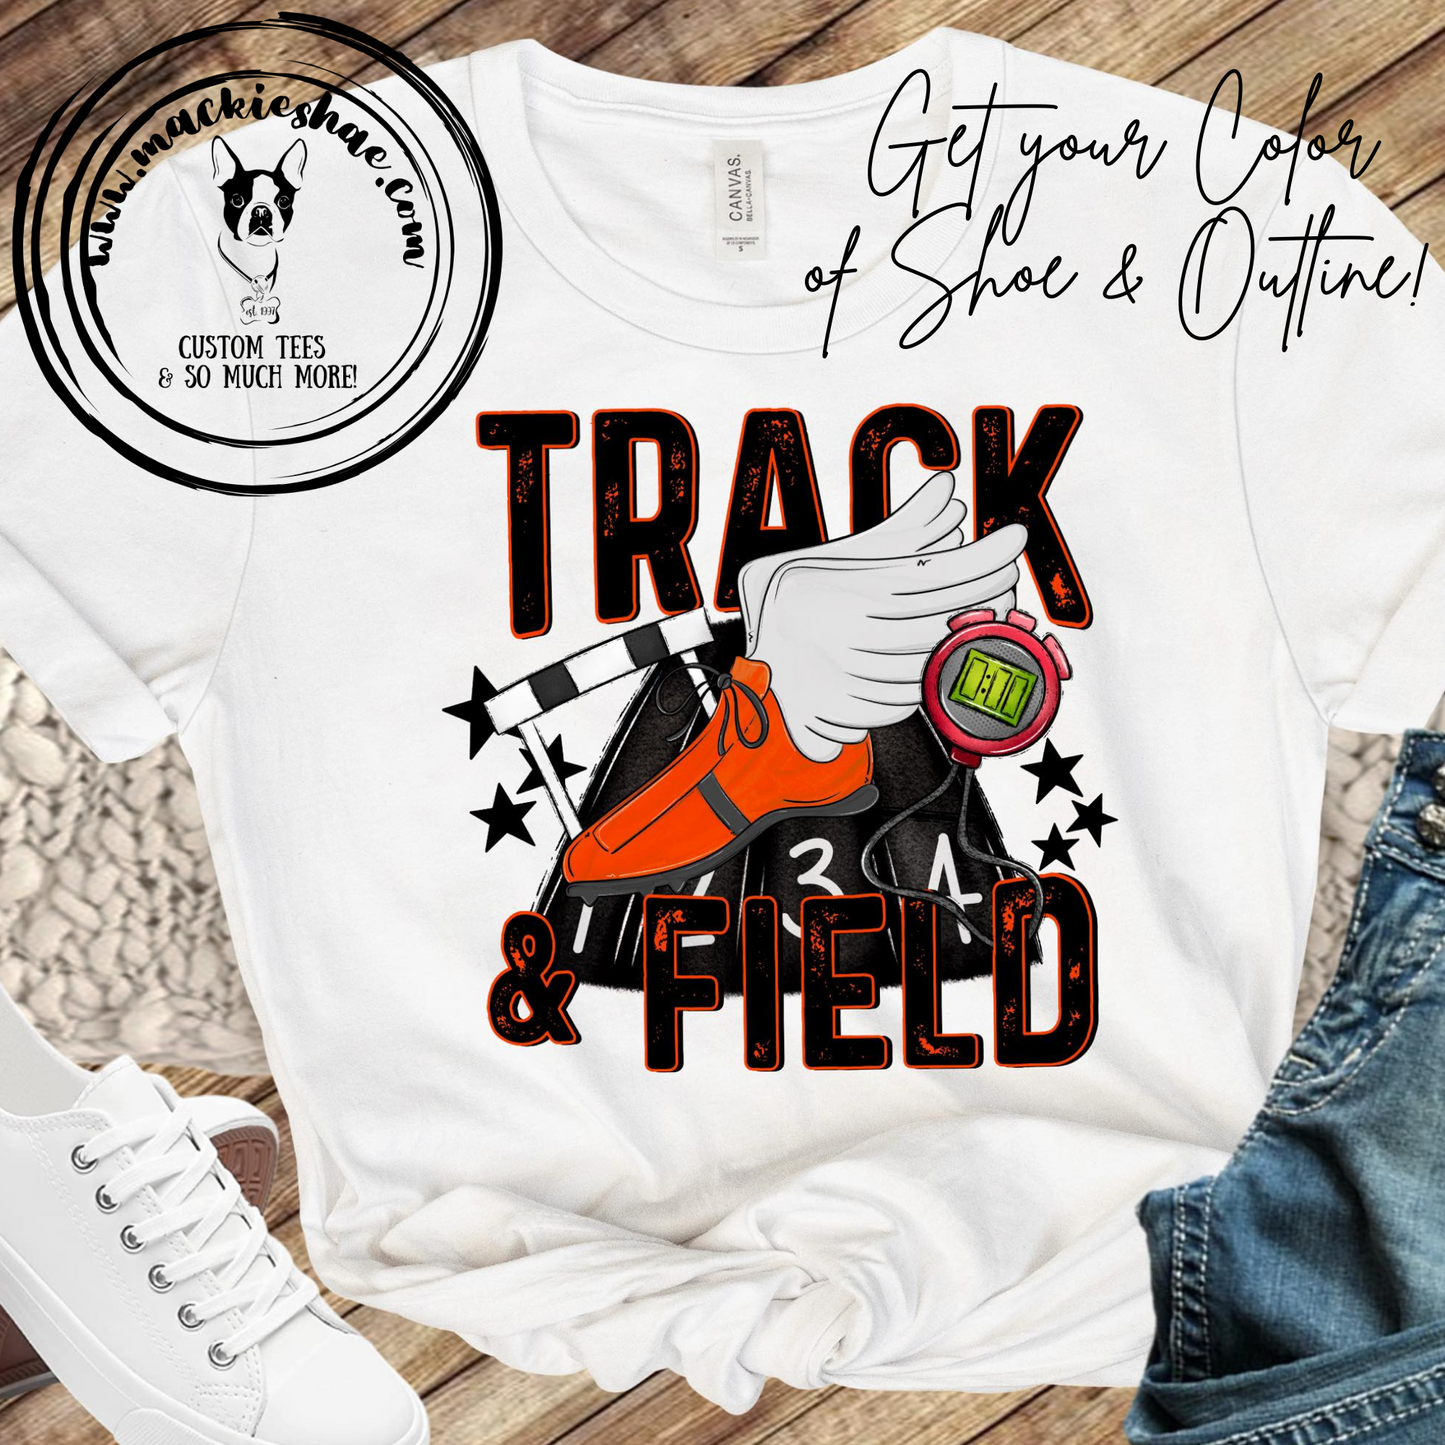 Track & Field Custom Shirt for Kids and Adults, Get your color of shoe & outline!